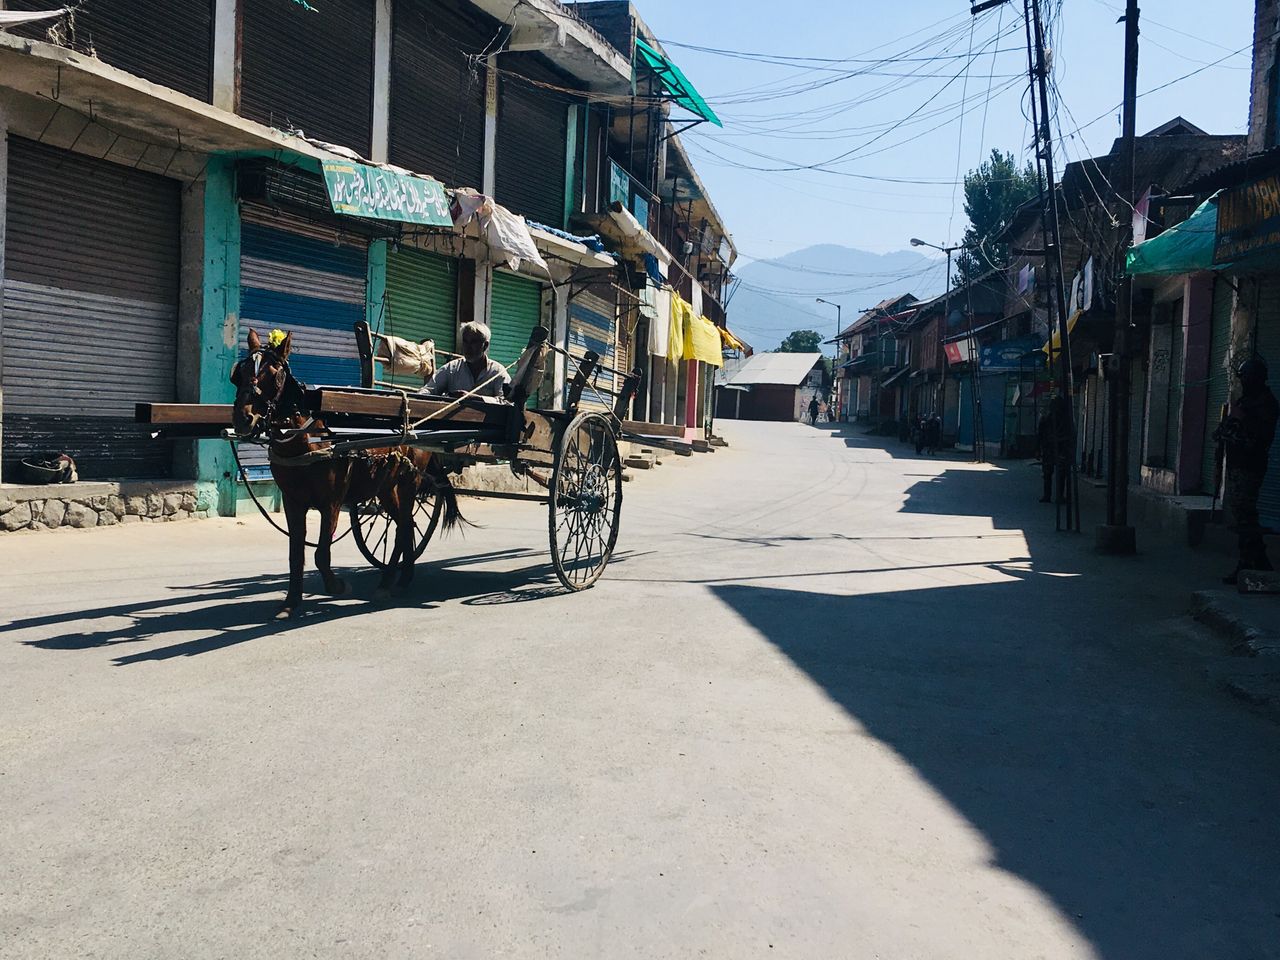 The main market in Tral, located in south Kashmir, was empty on the afternoon of Sept. 19, 2019.